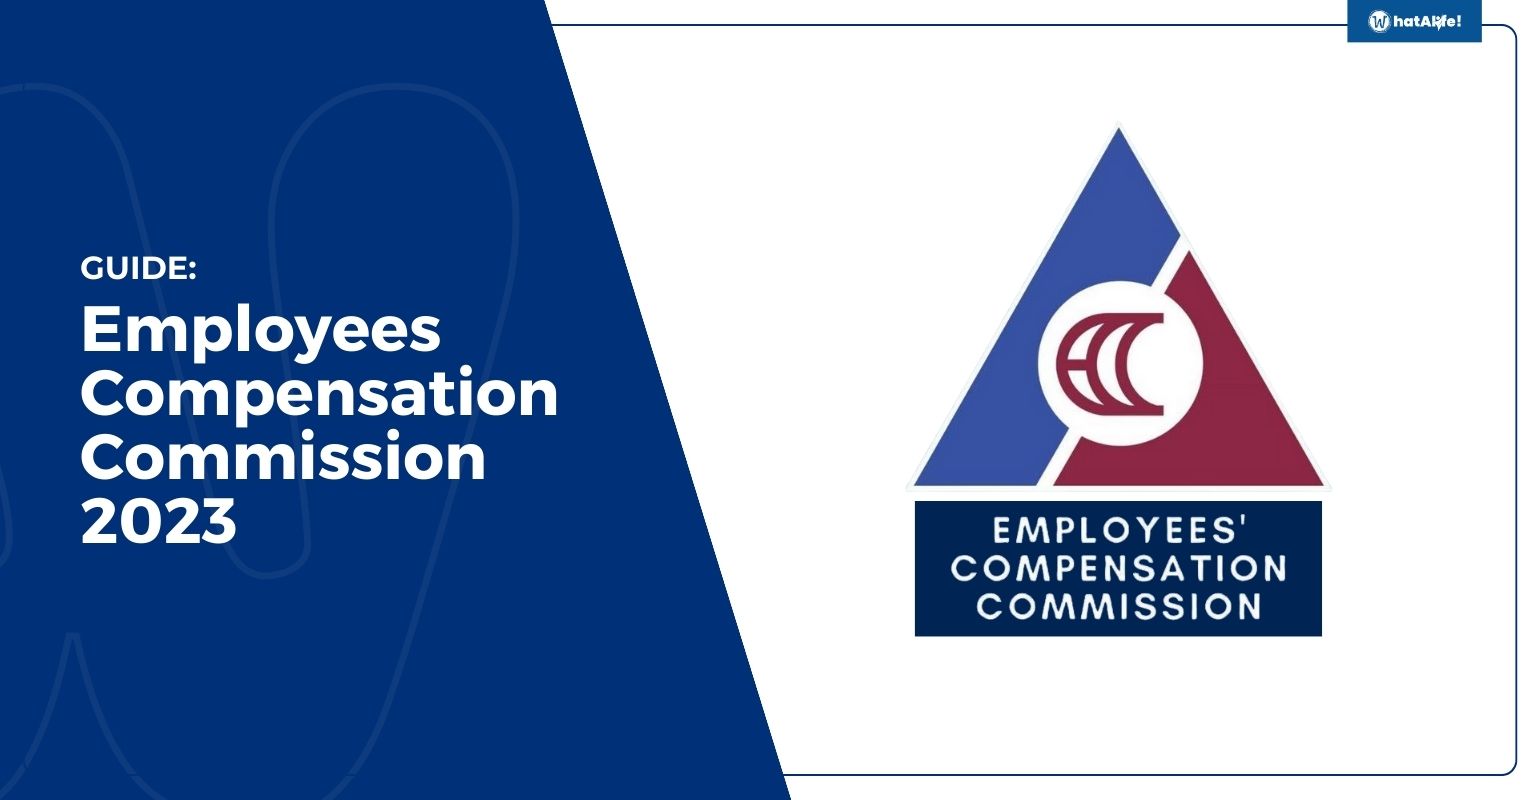 GUIDE: Employees Compensation Commission 2023